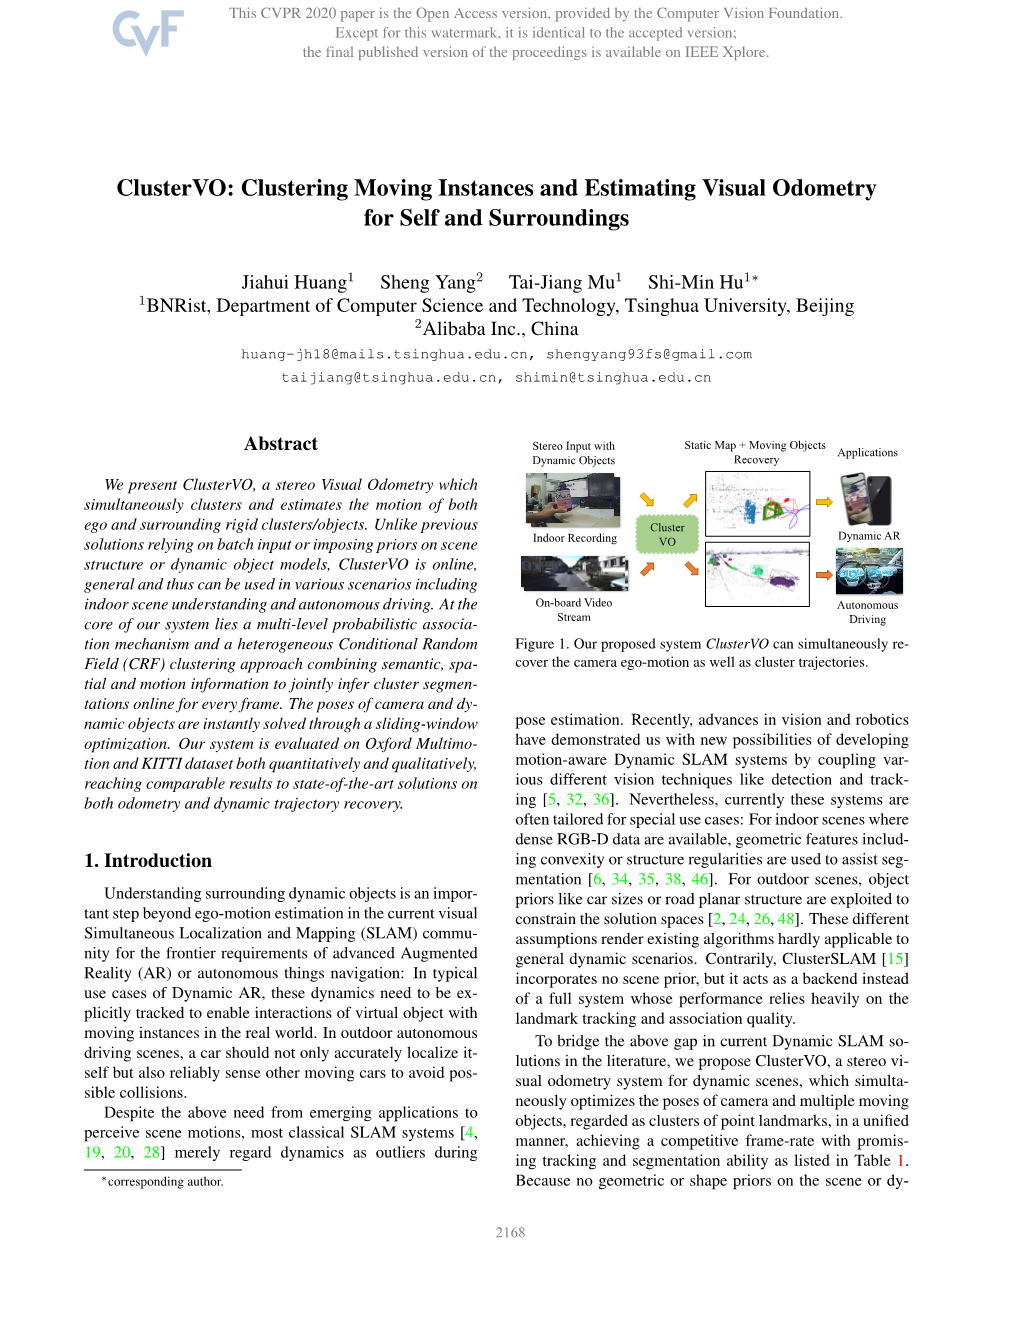 Clustering Moving Instances and Estimating Visual Odometry for Self and Surroundings